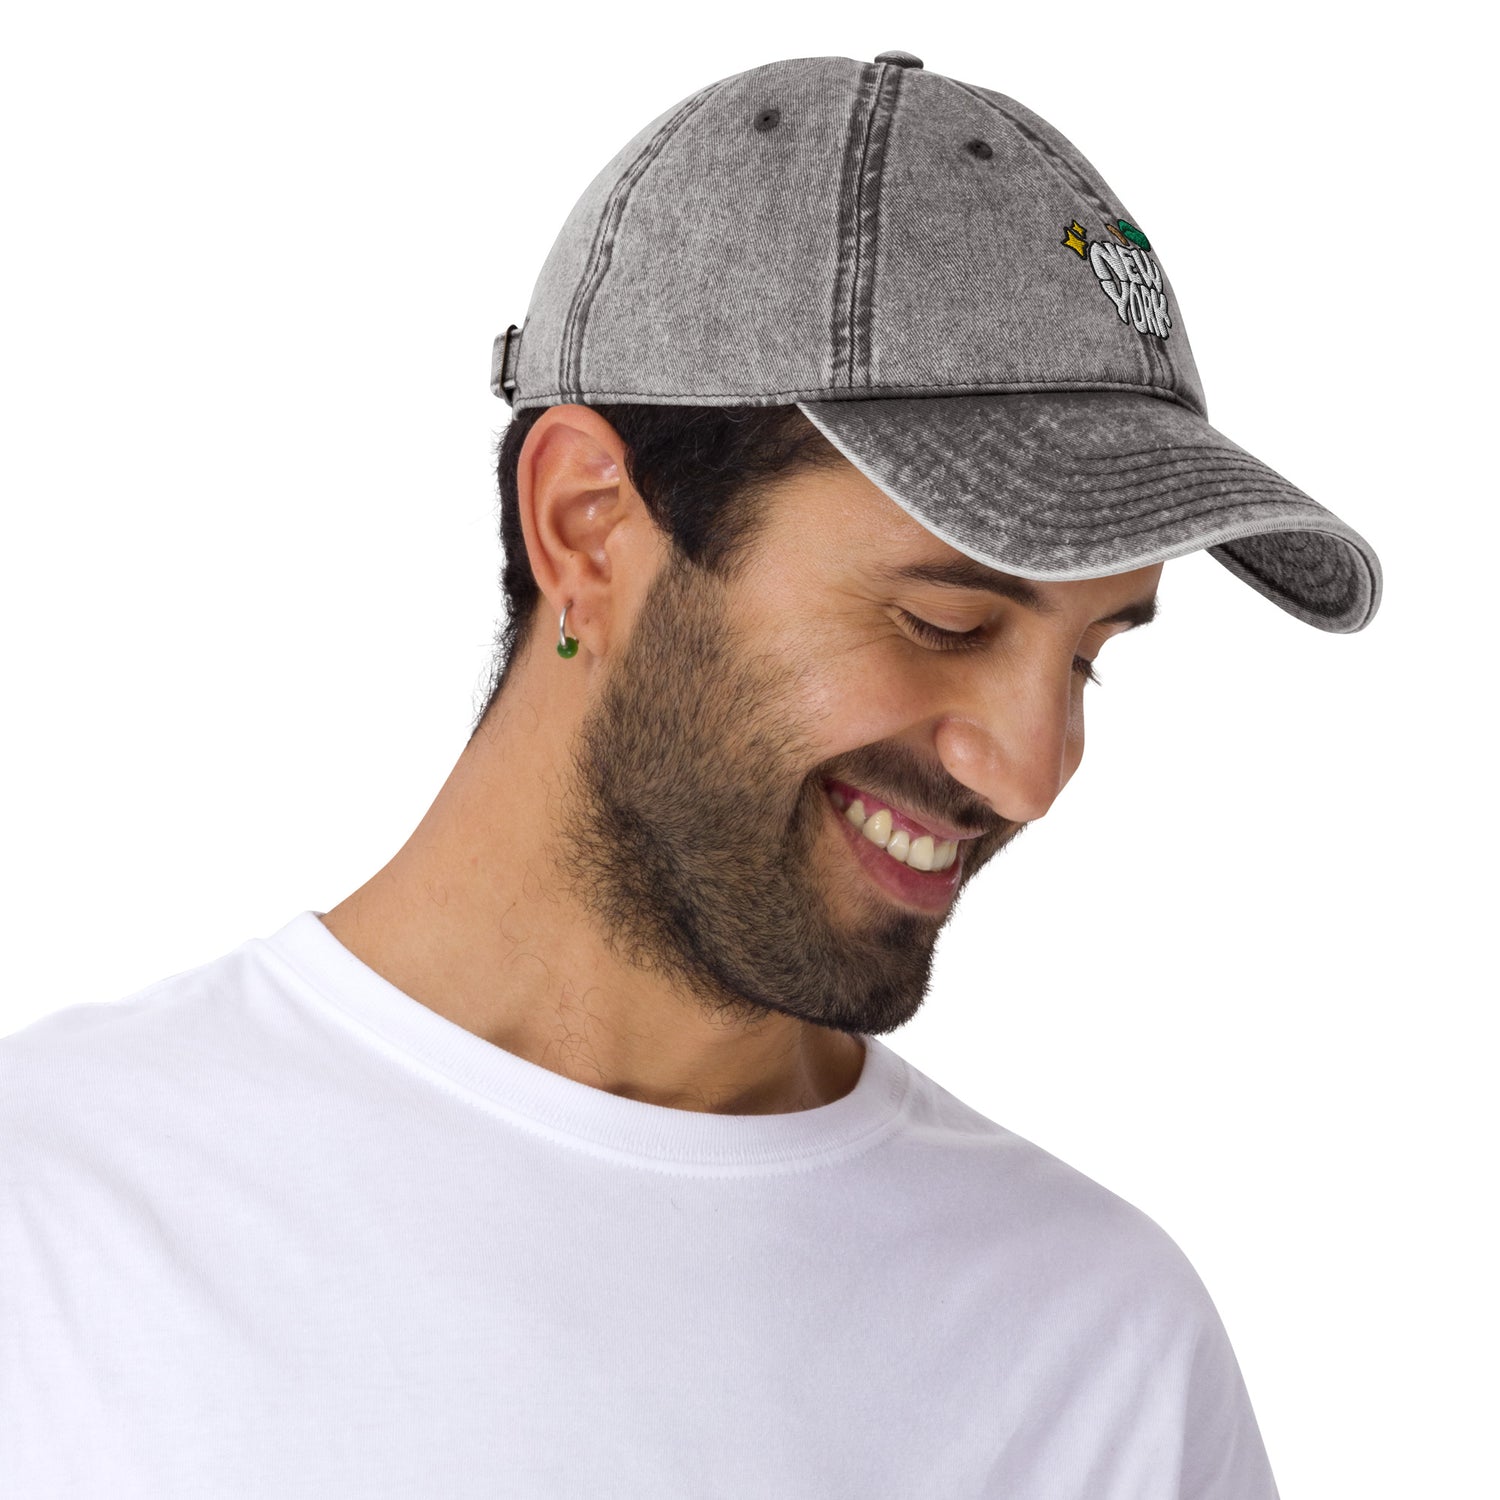 New York Apple Logo Embroidered Grey Vintage Cotton Twill Hat Scattered Streetwear